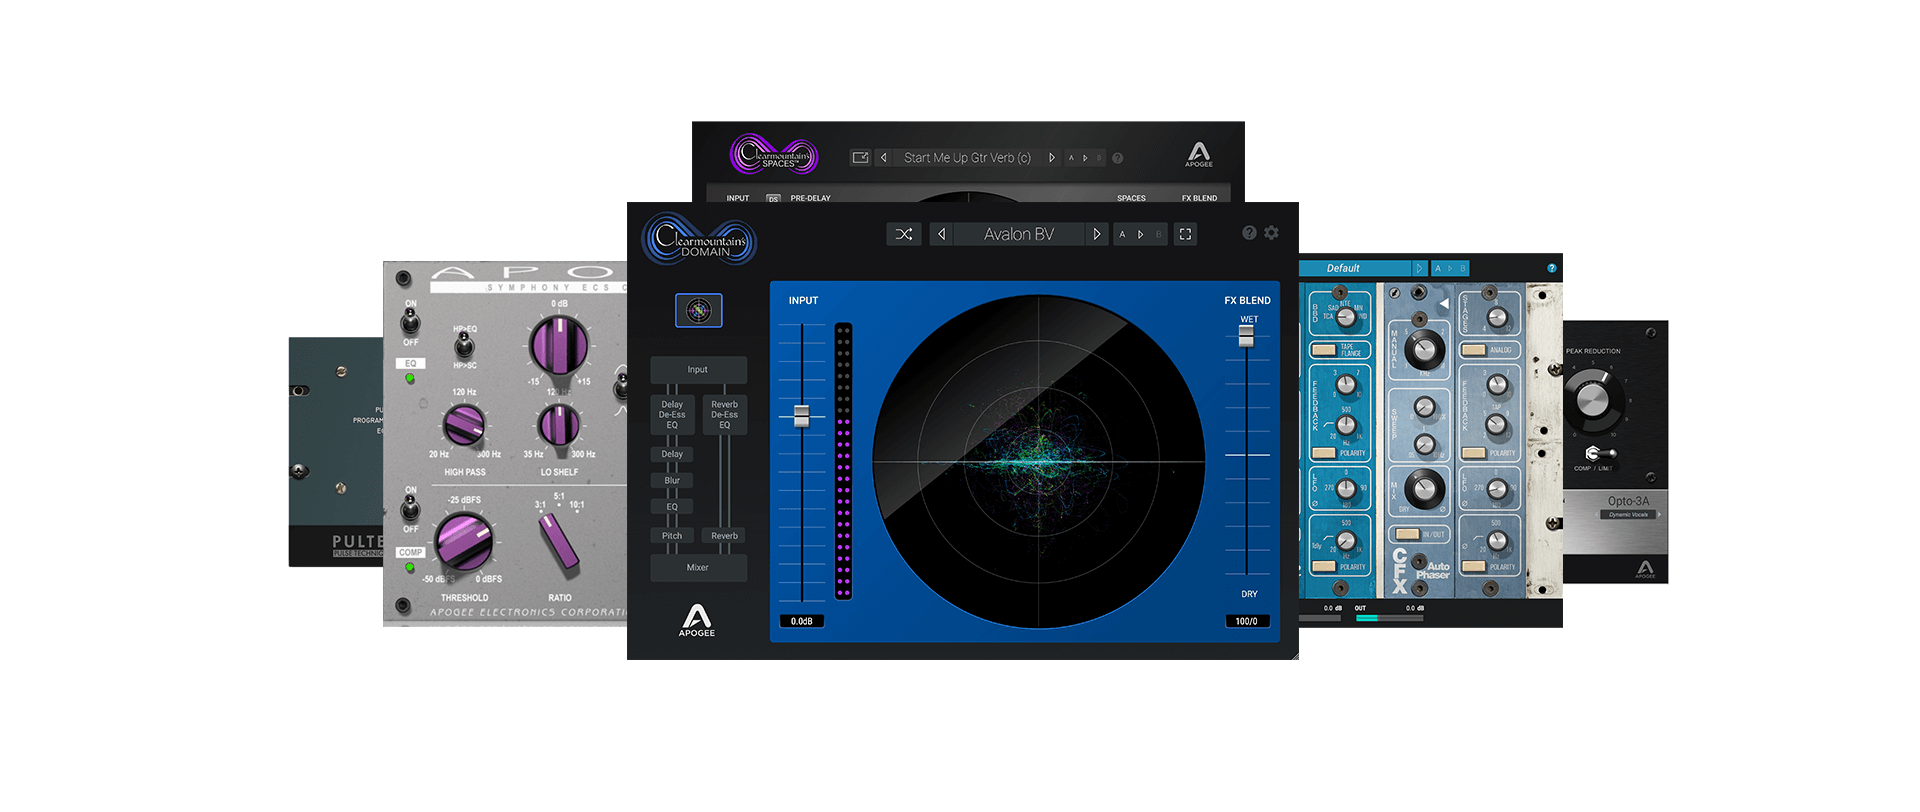 Get 50% Off Apogee Plugins when you buy a Apogee Duet